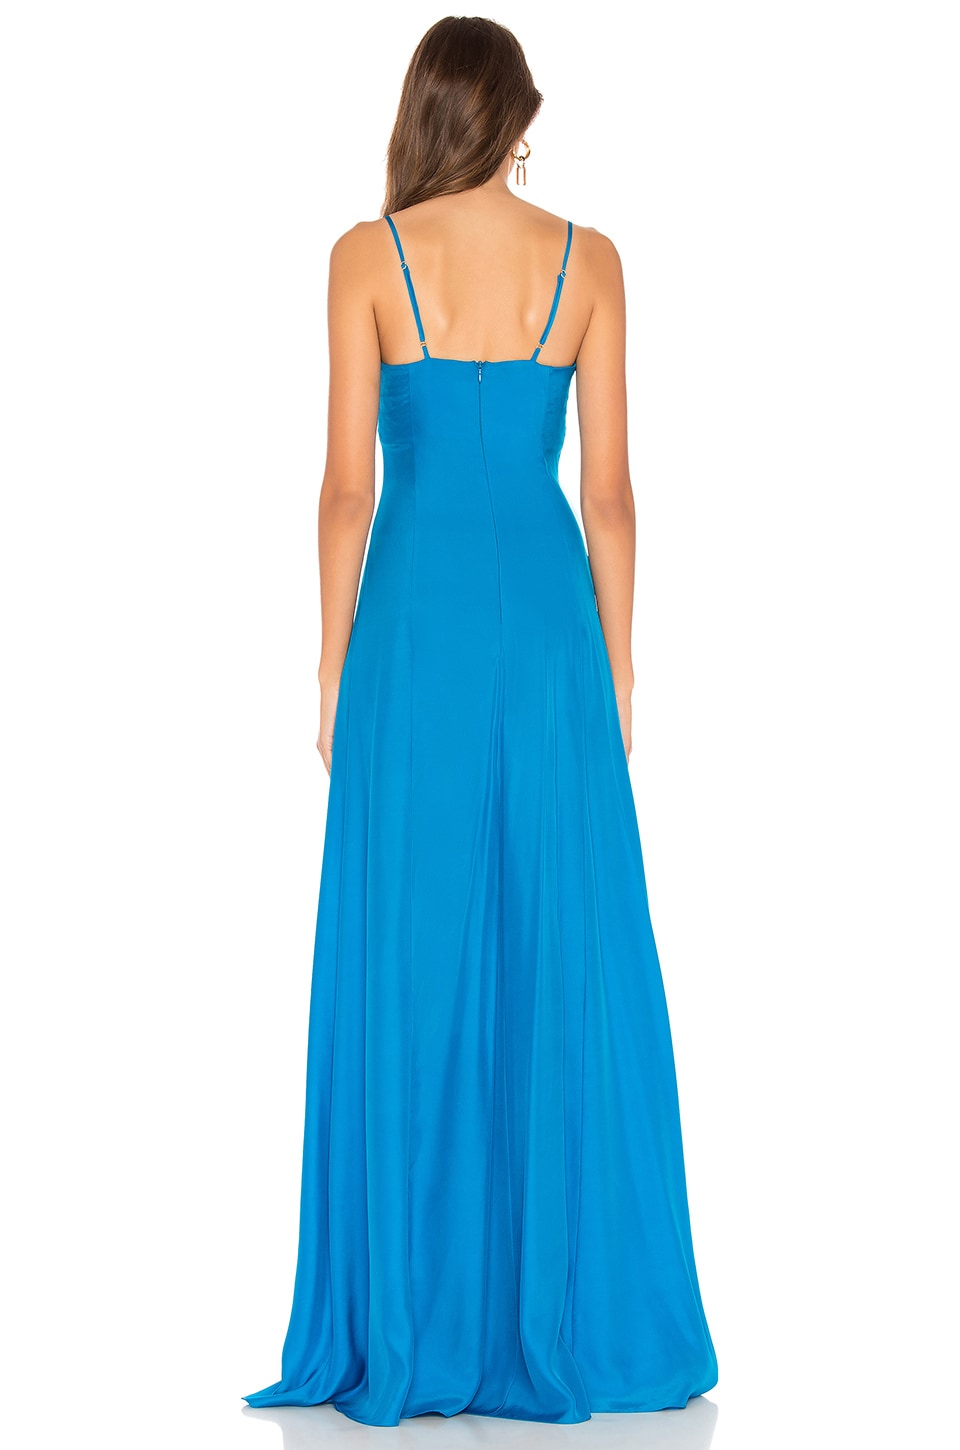 Amanda Uprichard Channing Gown in Electric Teal | REVOLVE